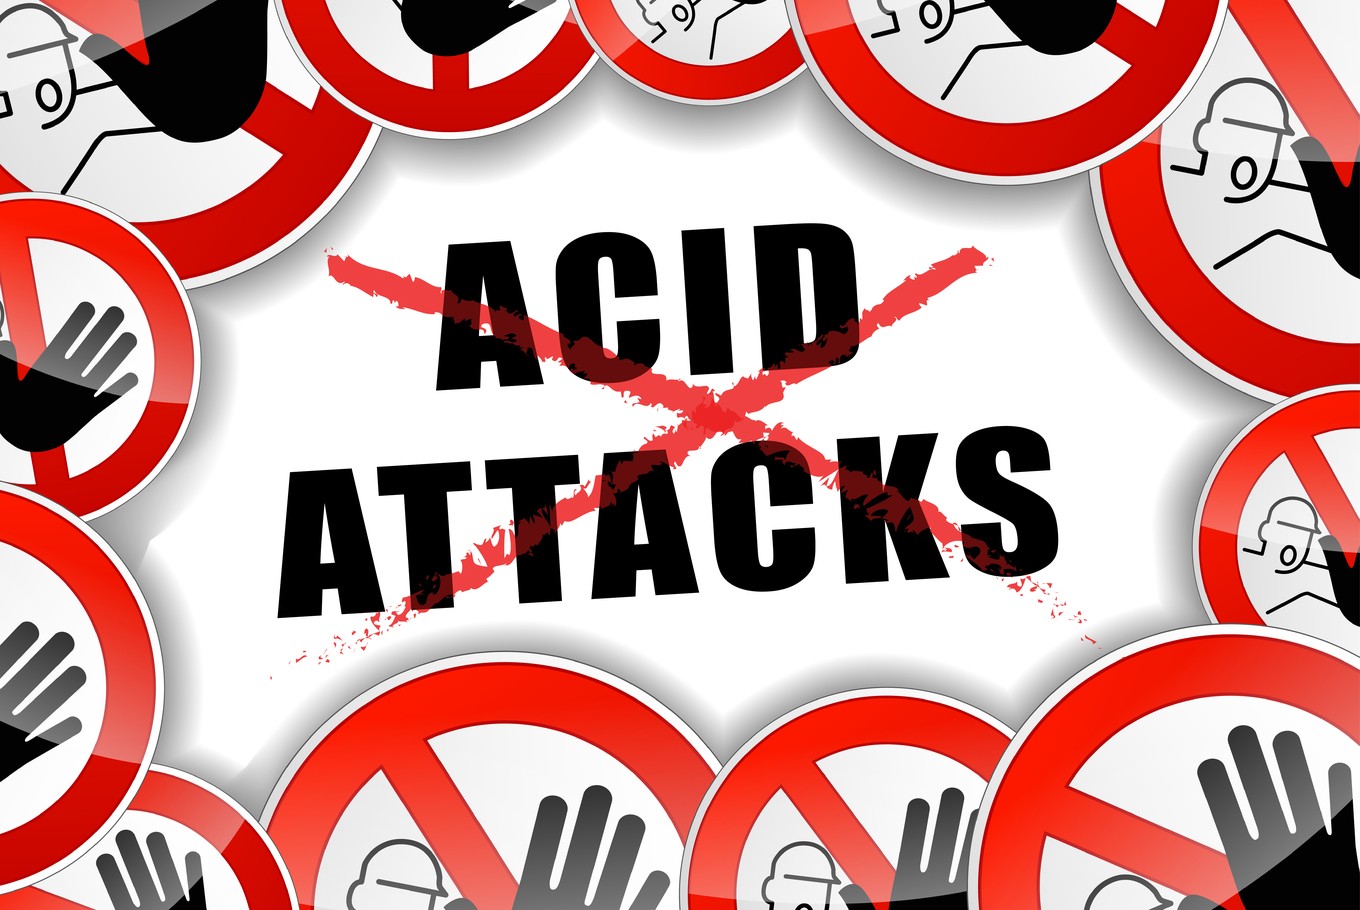 Bengaluru tops NCRB's list for Acid Attacks on women